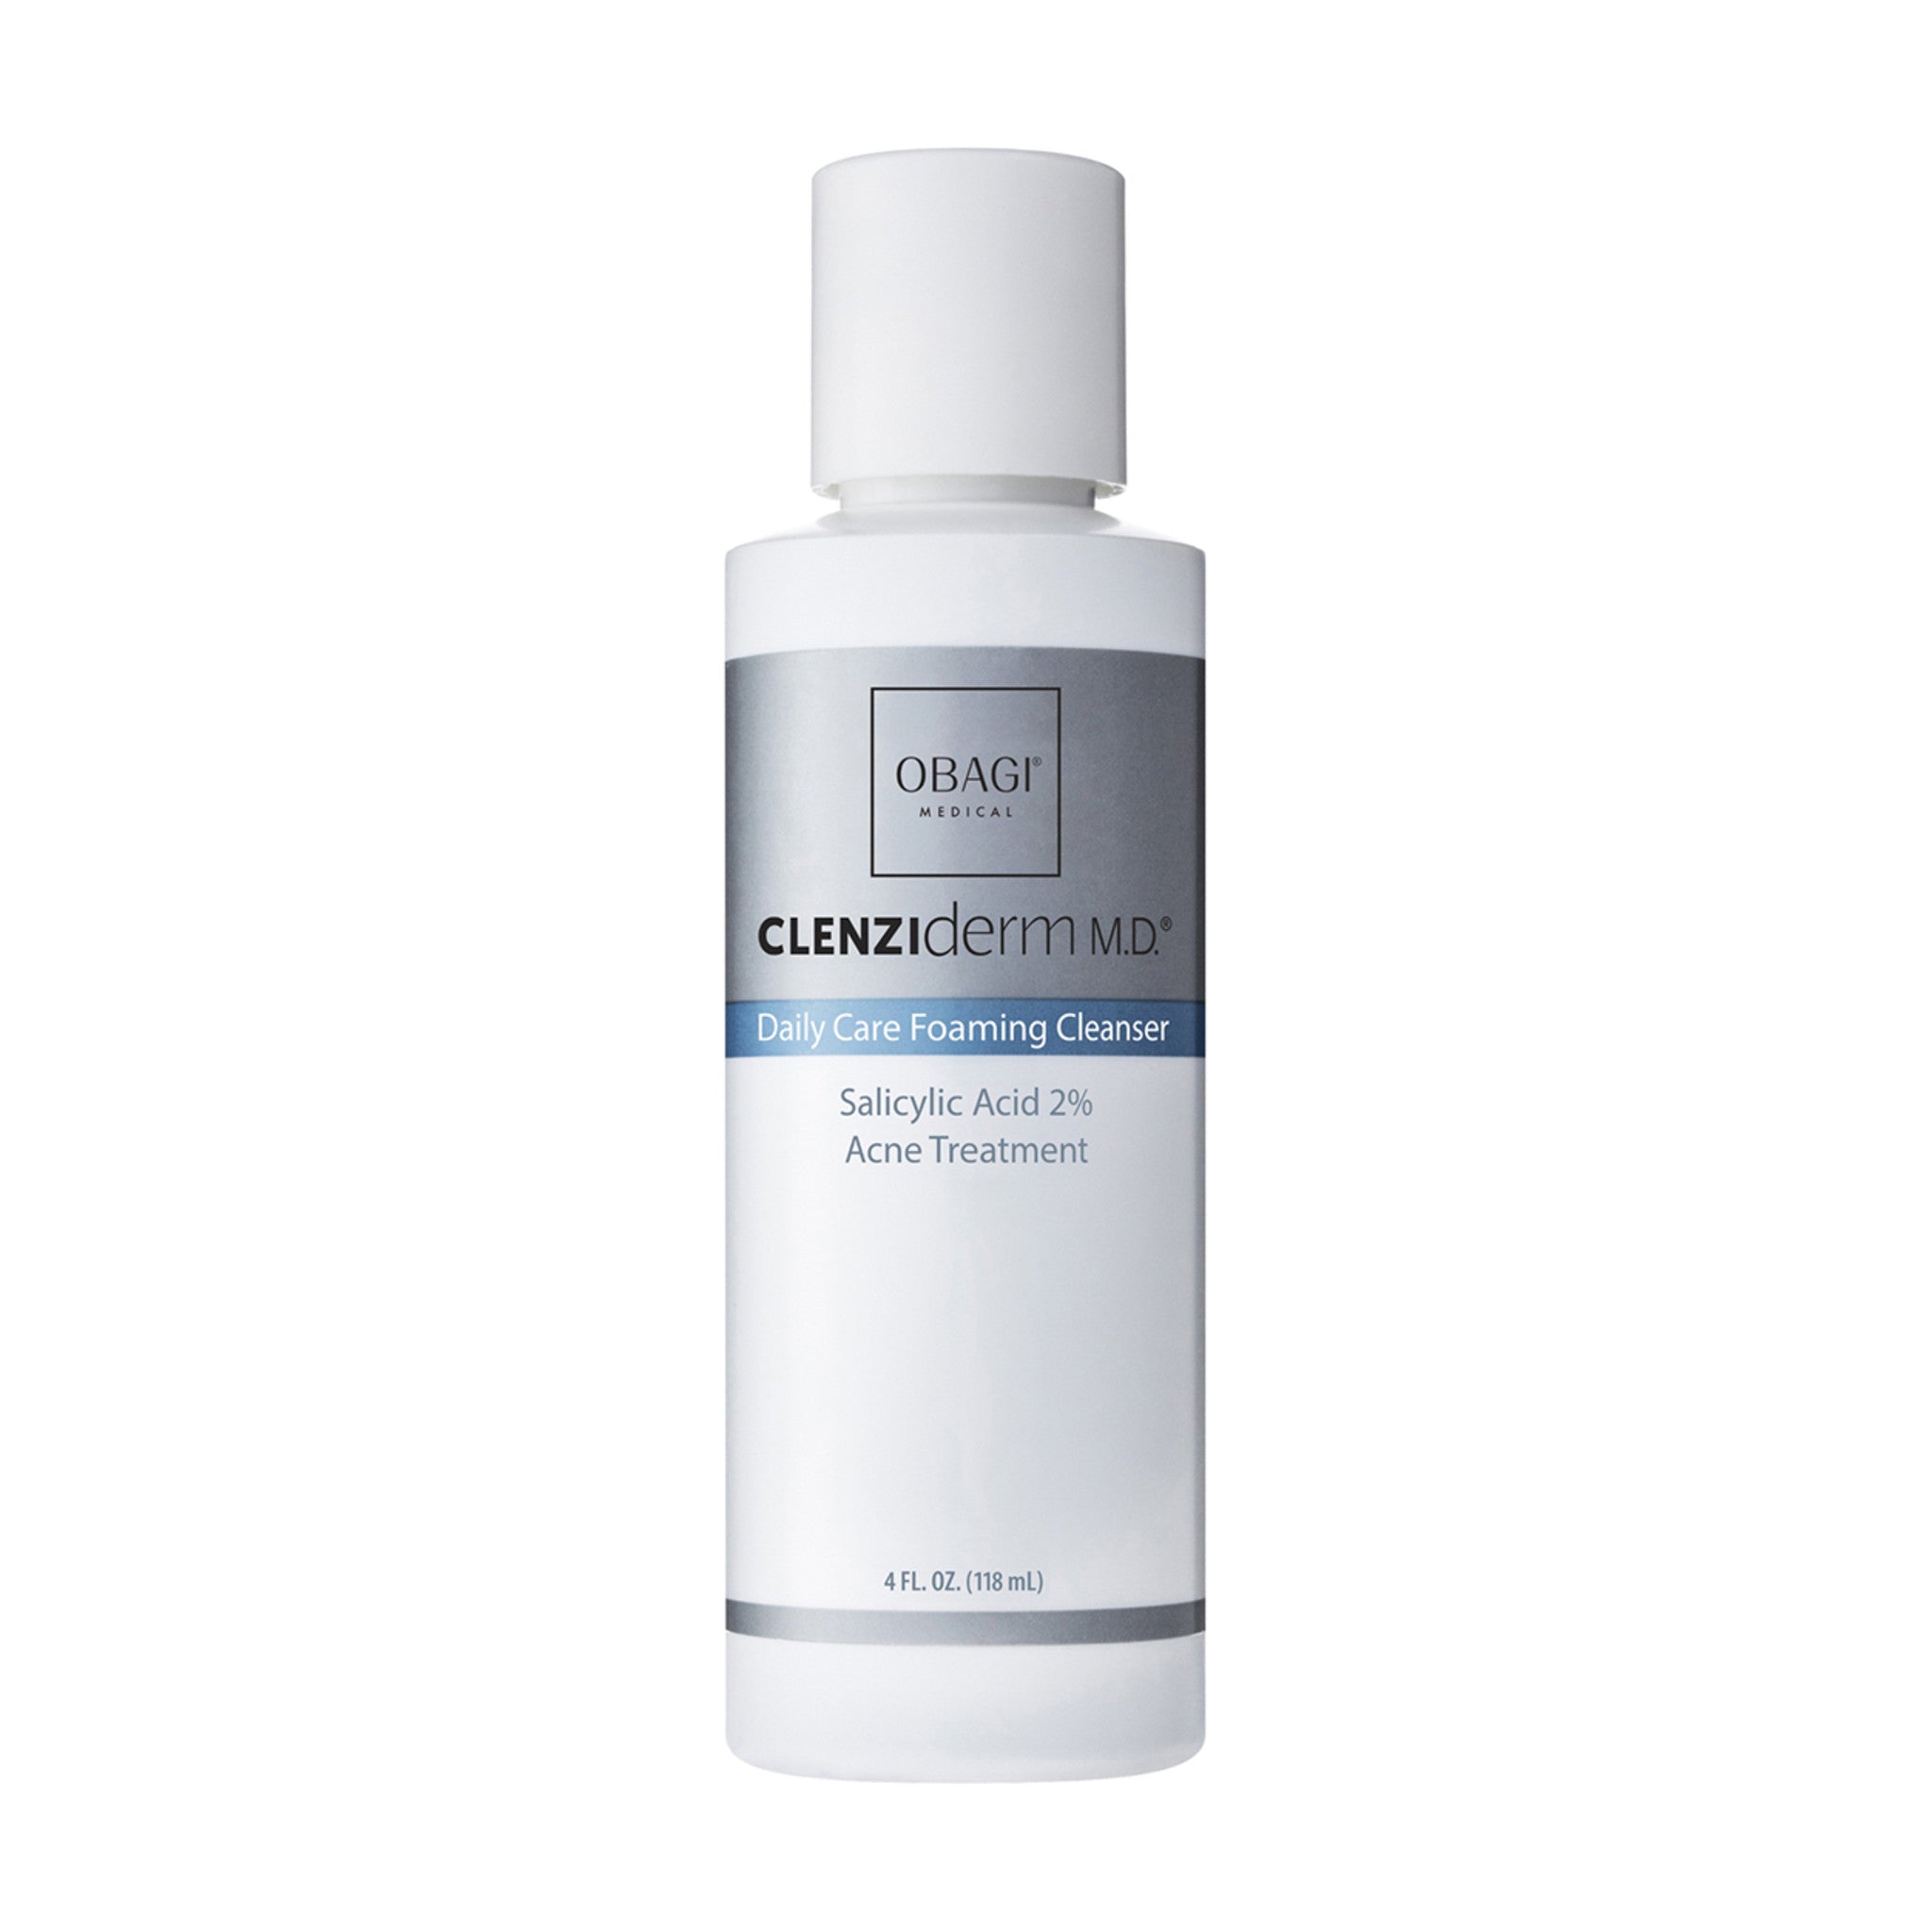 Obagi Clenziderm M.D. Daily Care Foaming Cleanser main image.